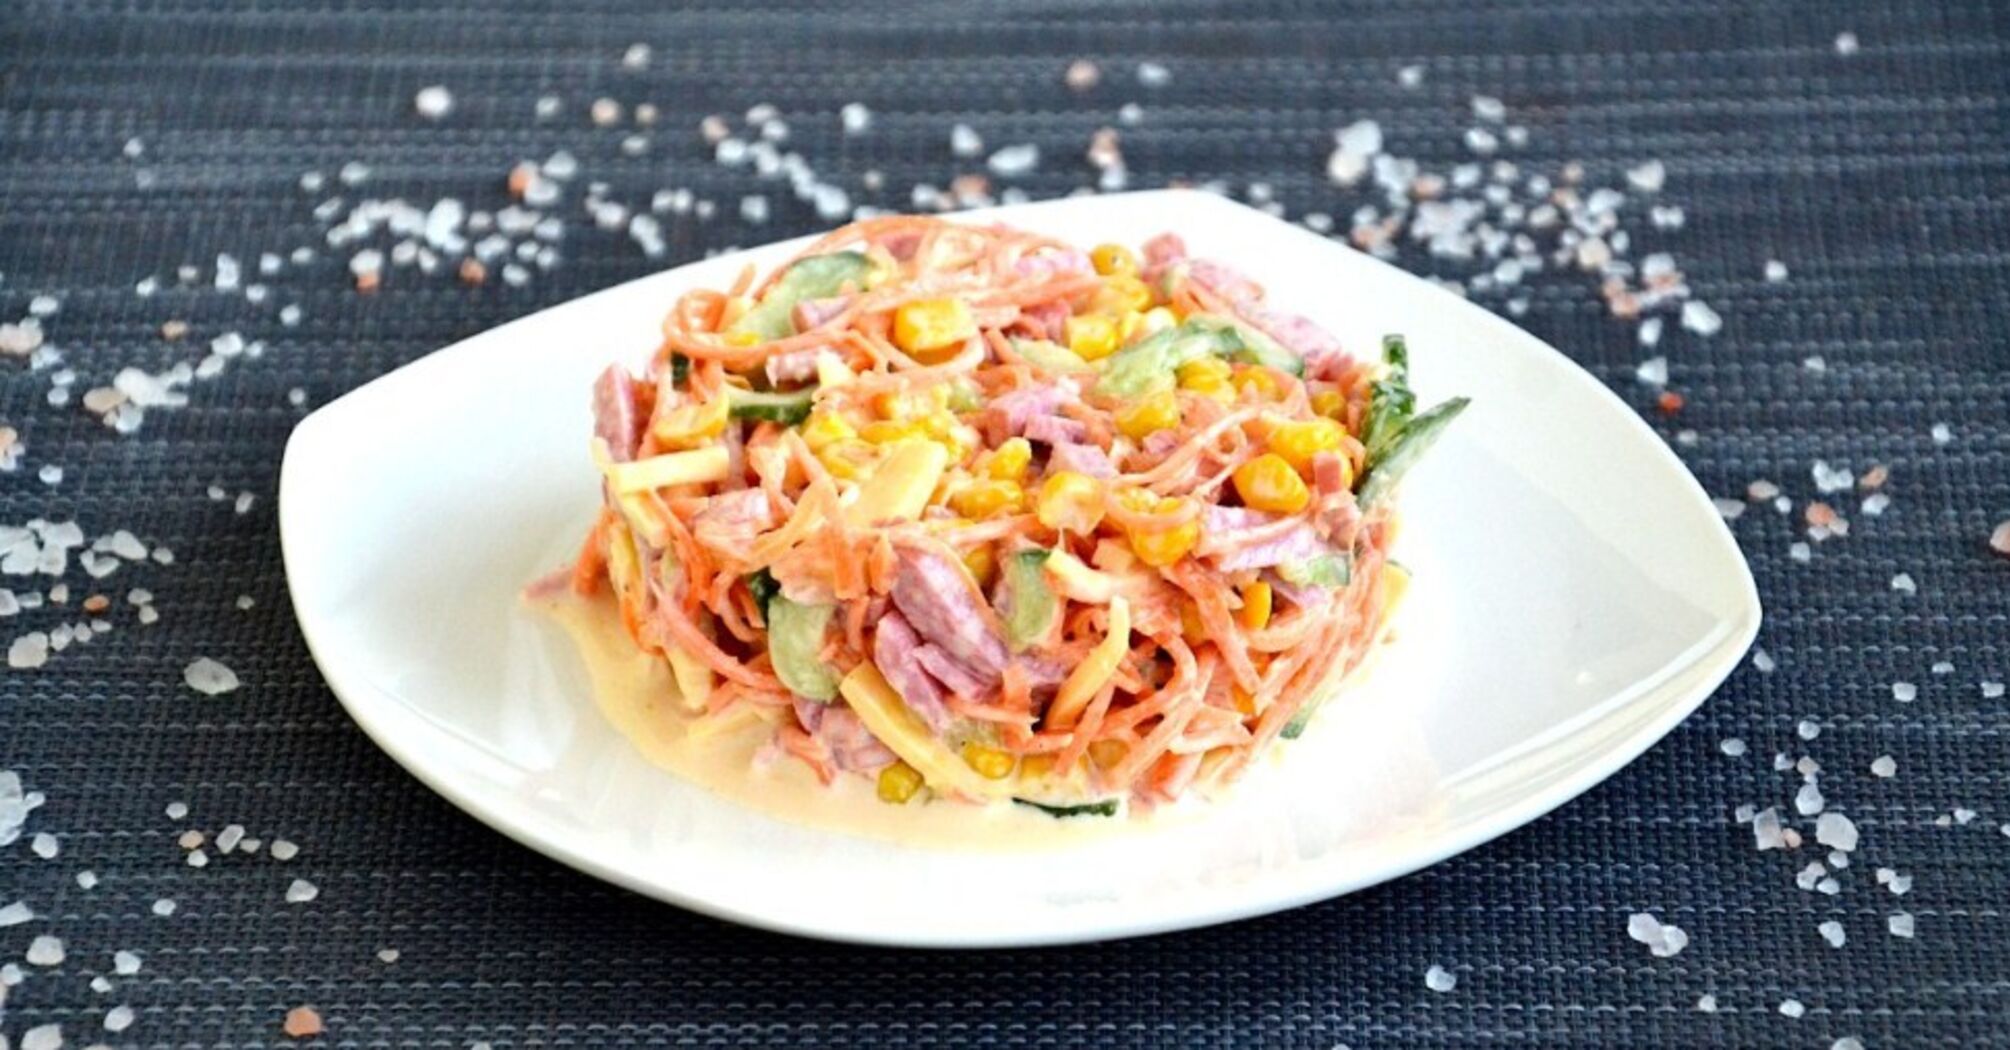 Korean salad recipe with meat and carrots